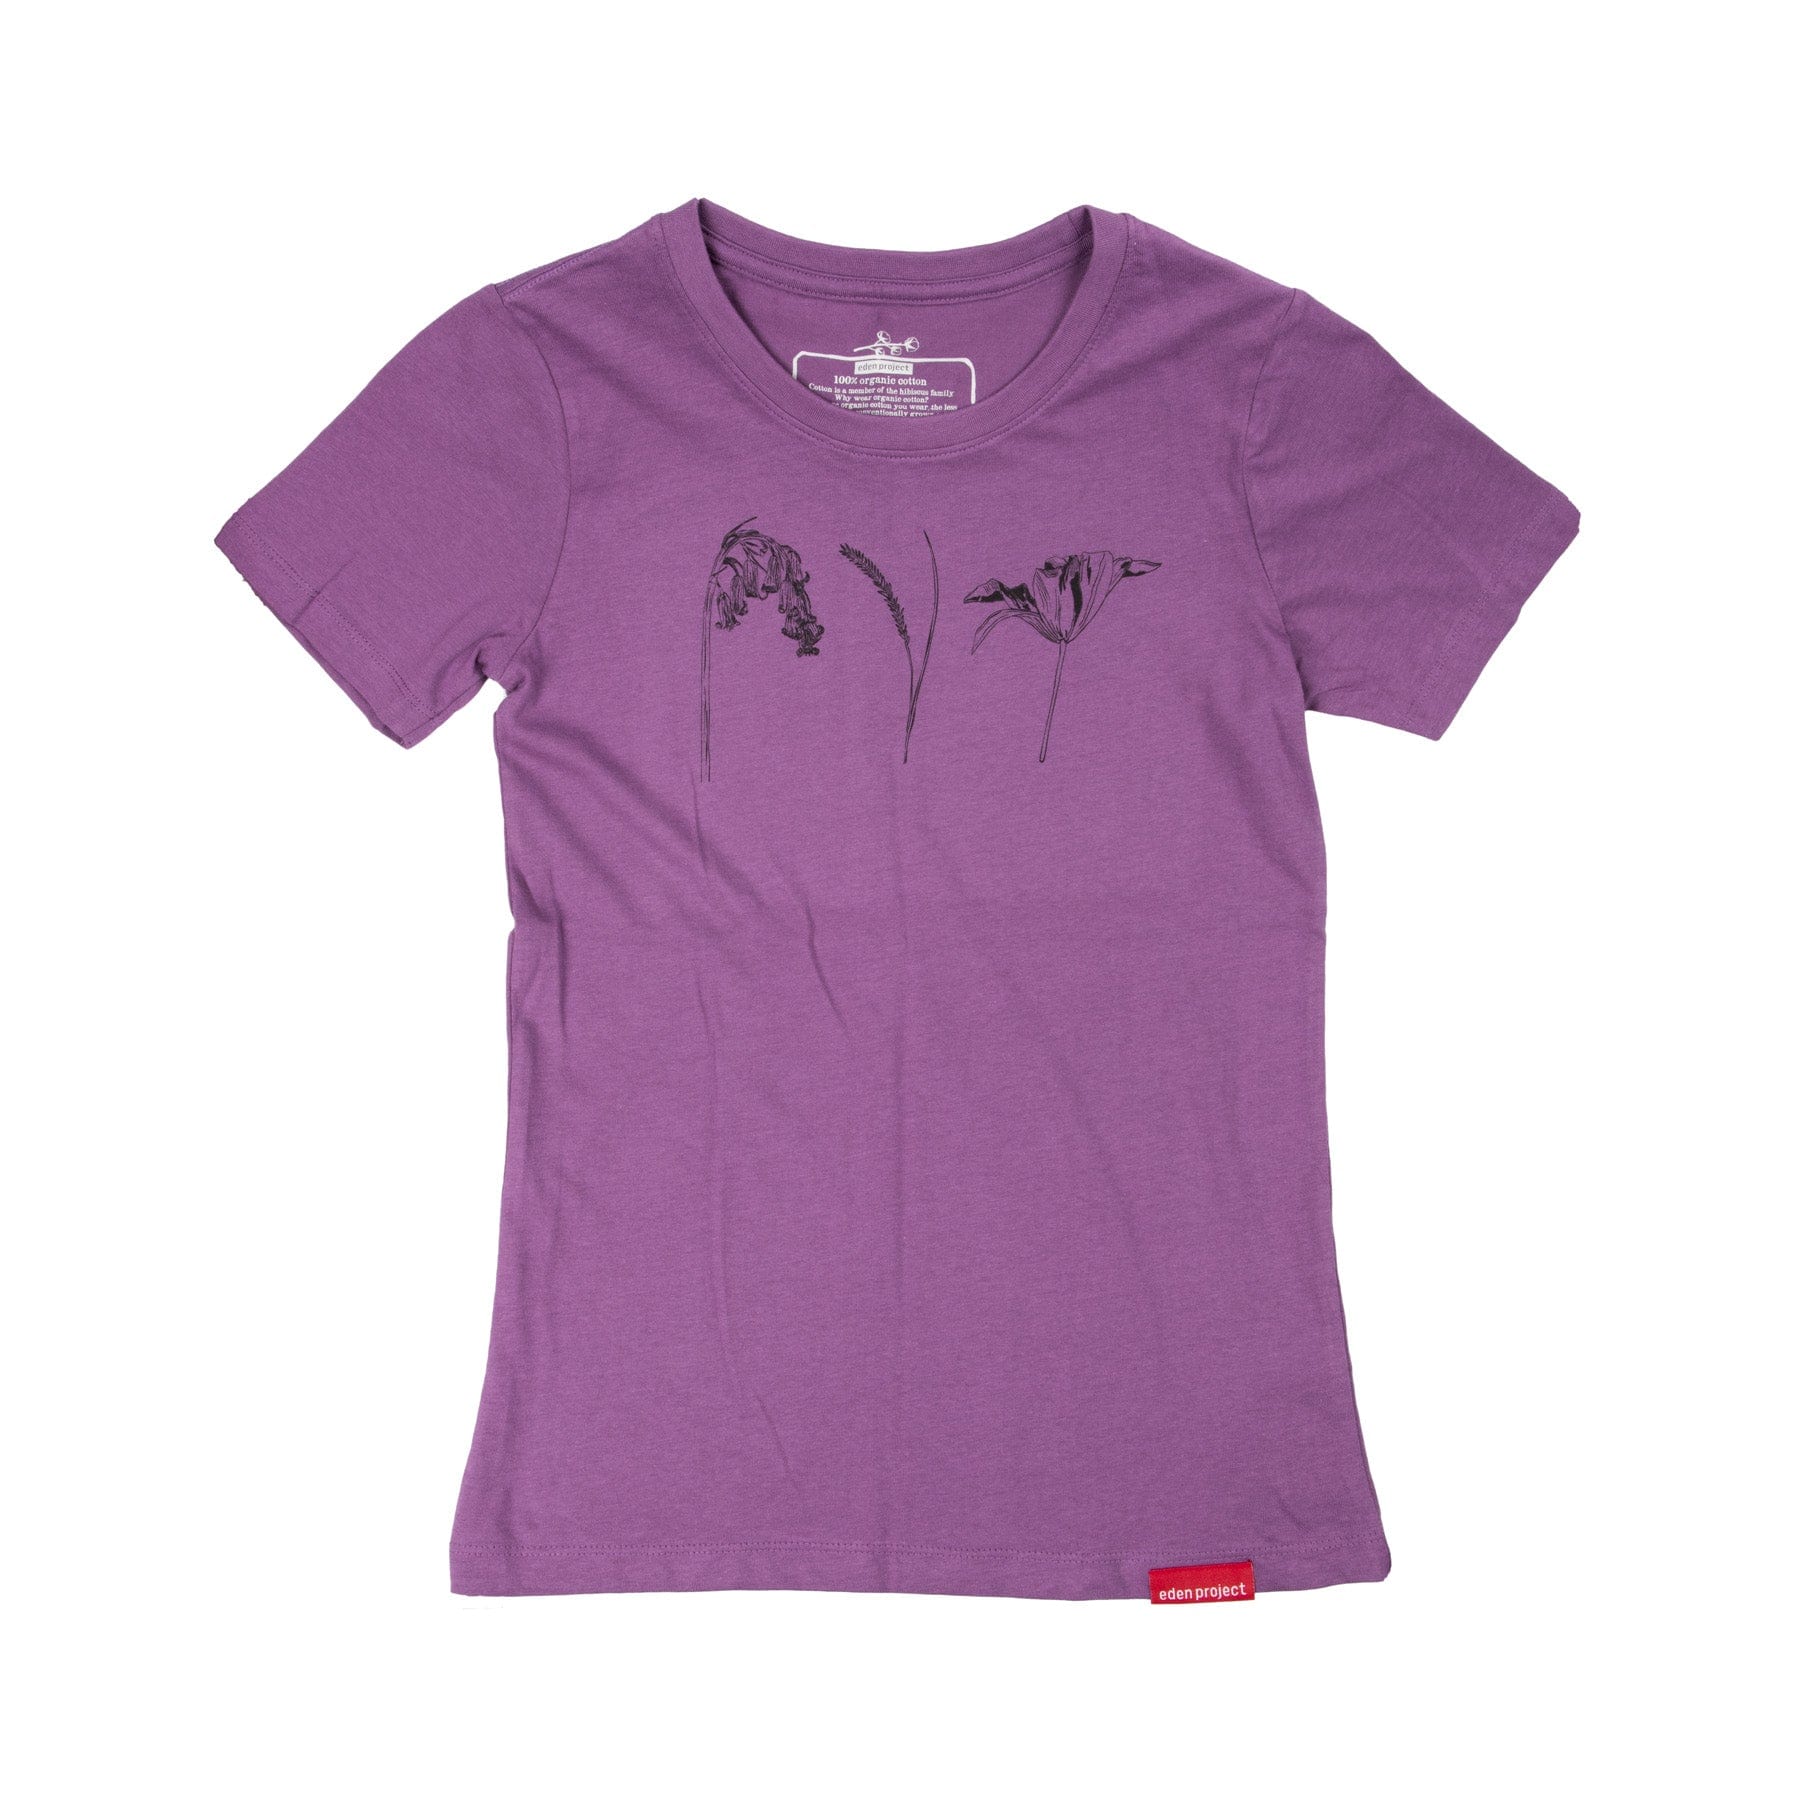 Women's lined floral t-shirt